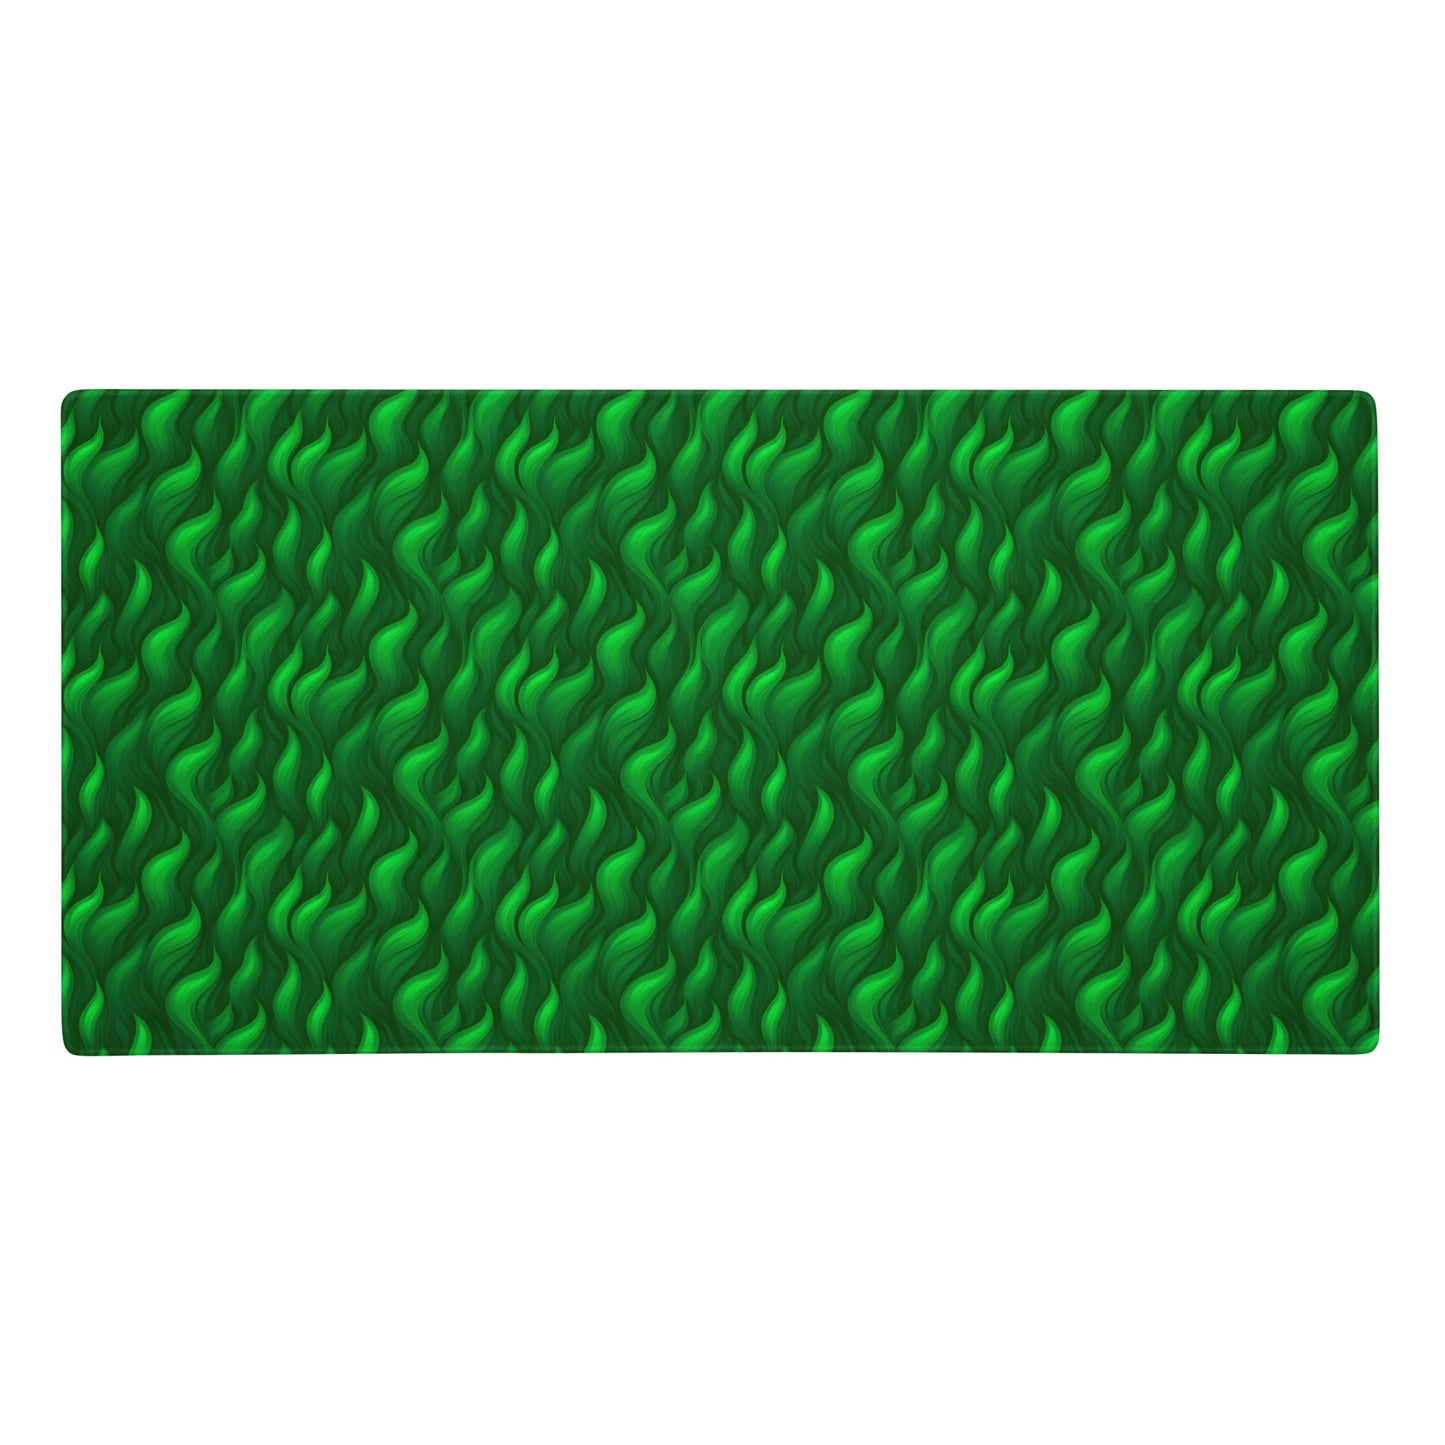 A 36" x 18" desk pad with a wavy flame pattern on it. Green in color.